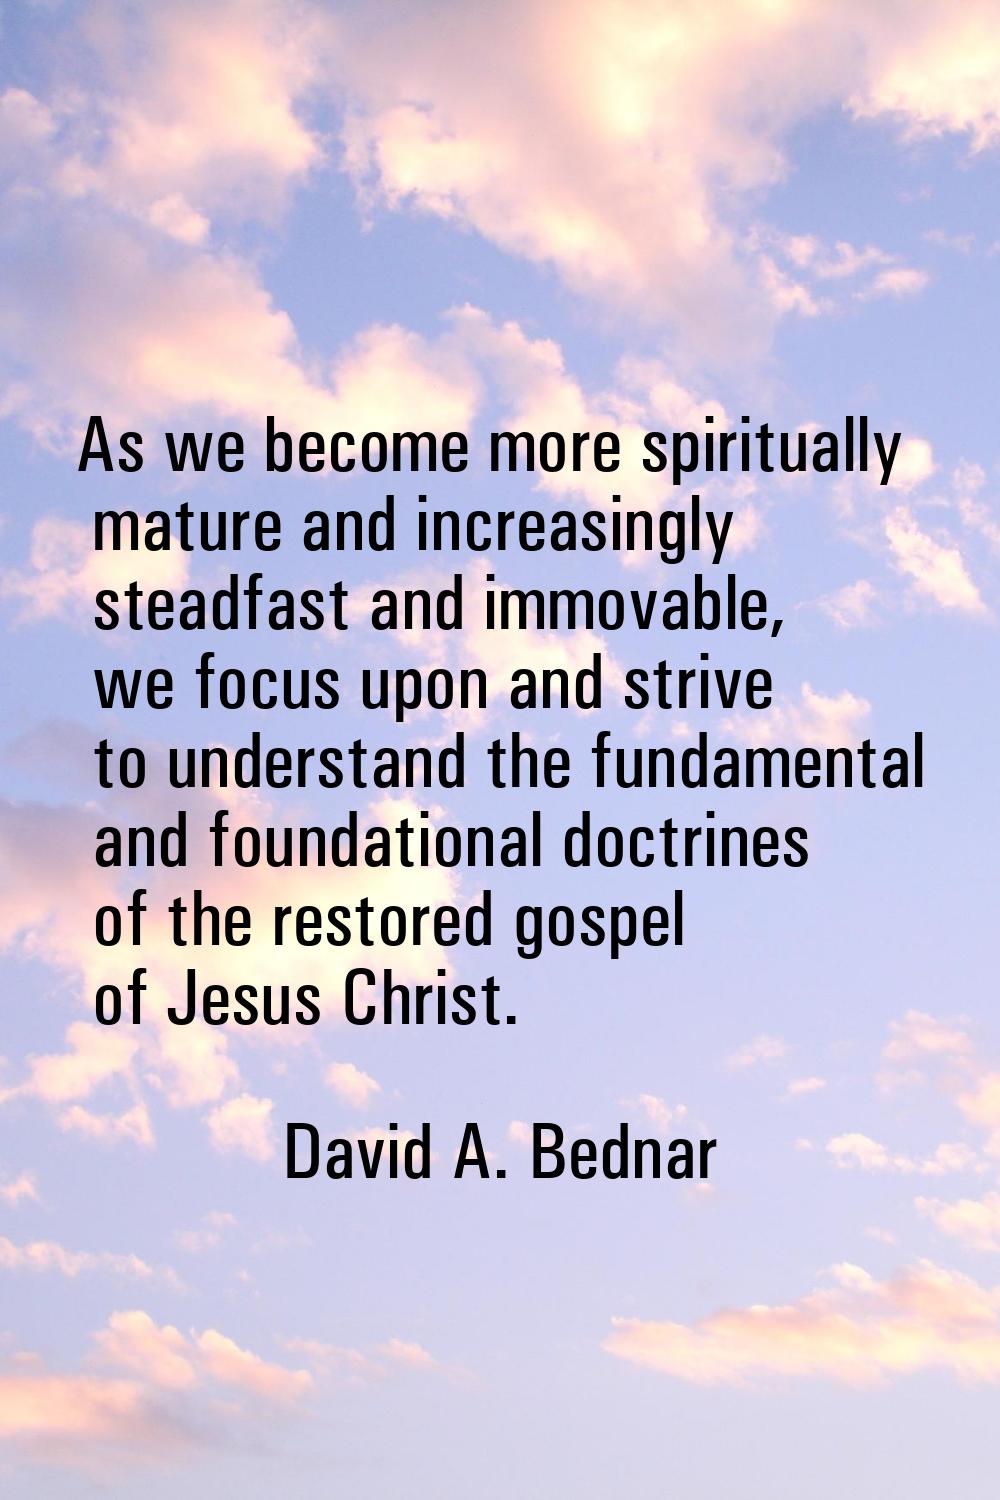 As we become more spiritually mature and increasingly steadfast and immovable, we focus upon and st